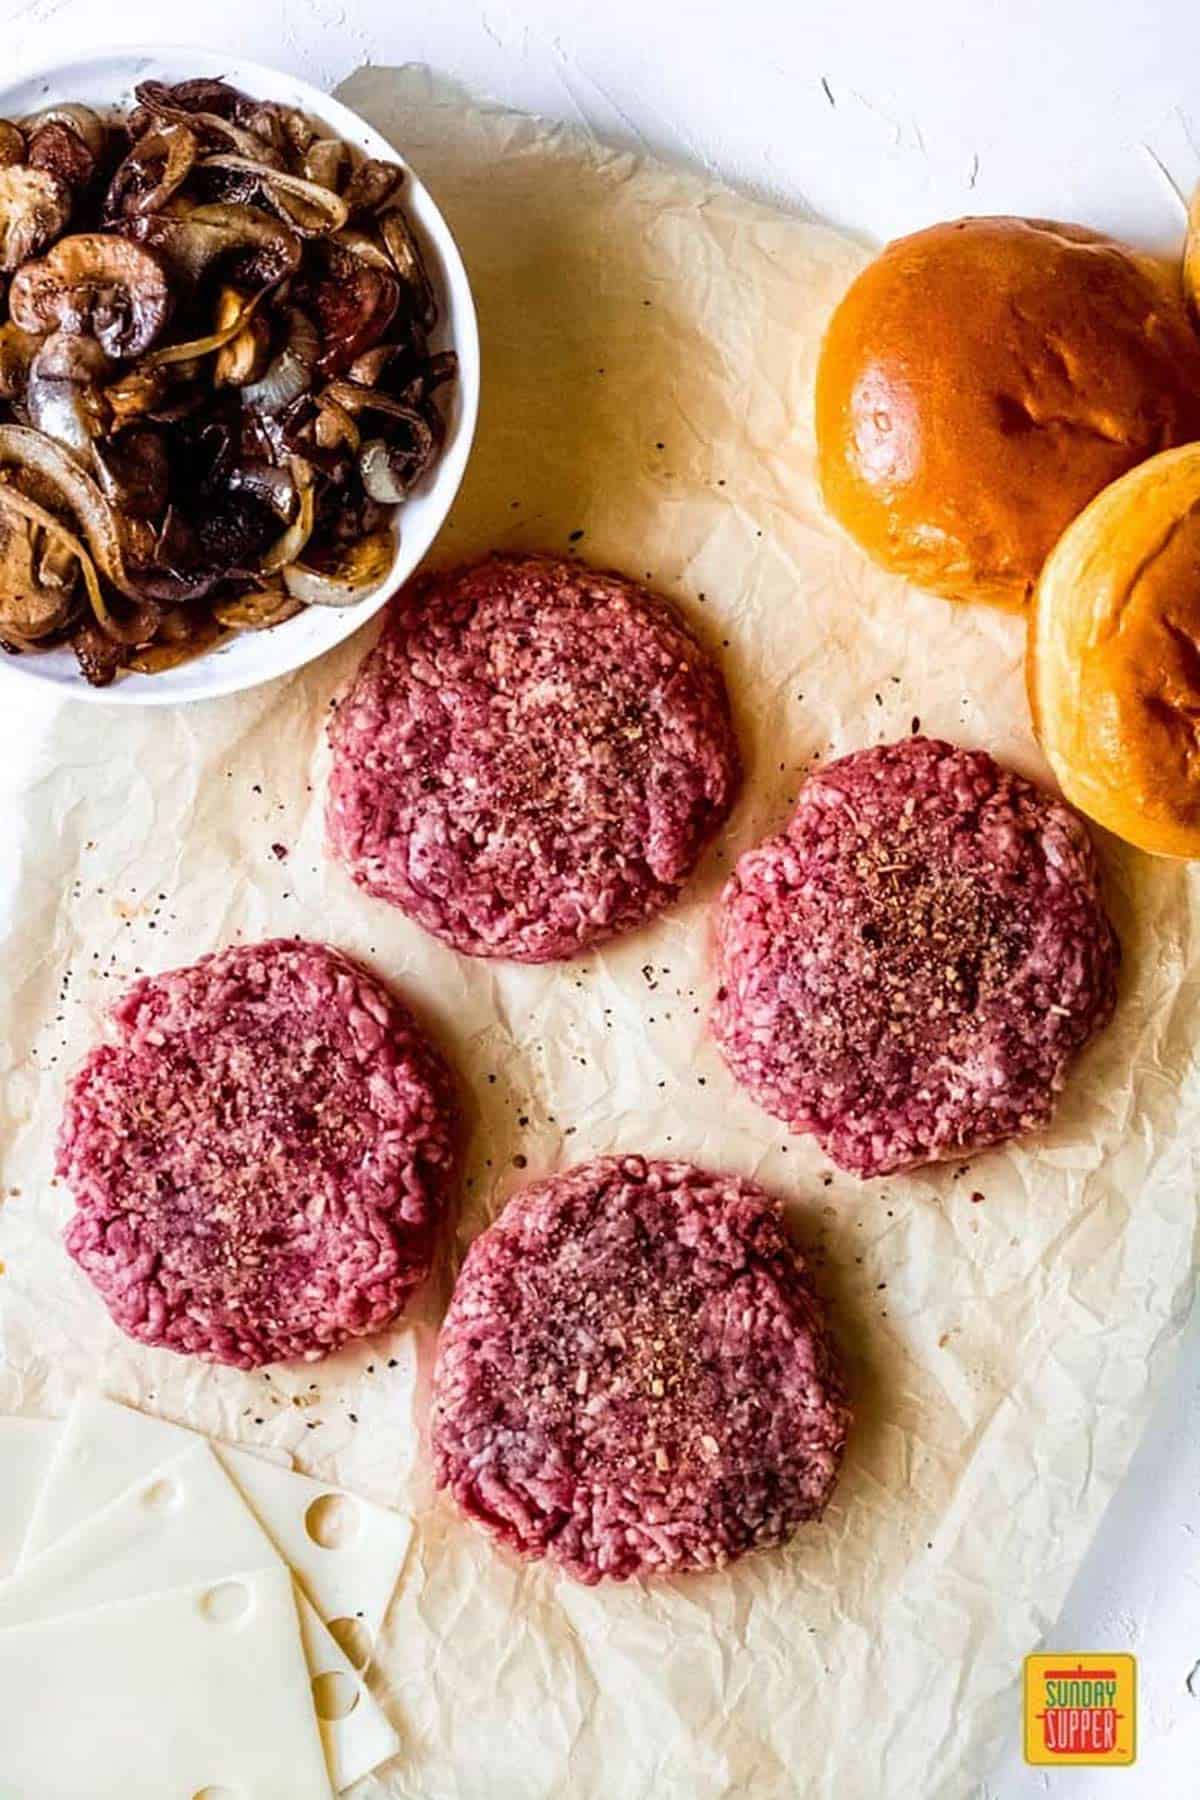 Four ground beef hamburger patties on parchment paper with four slices of swiss cheese, a bowl of sautéed mushrooms and onions, and brioche buns, ready to make Mushroom Swiss Burgers